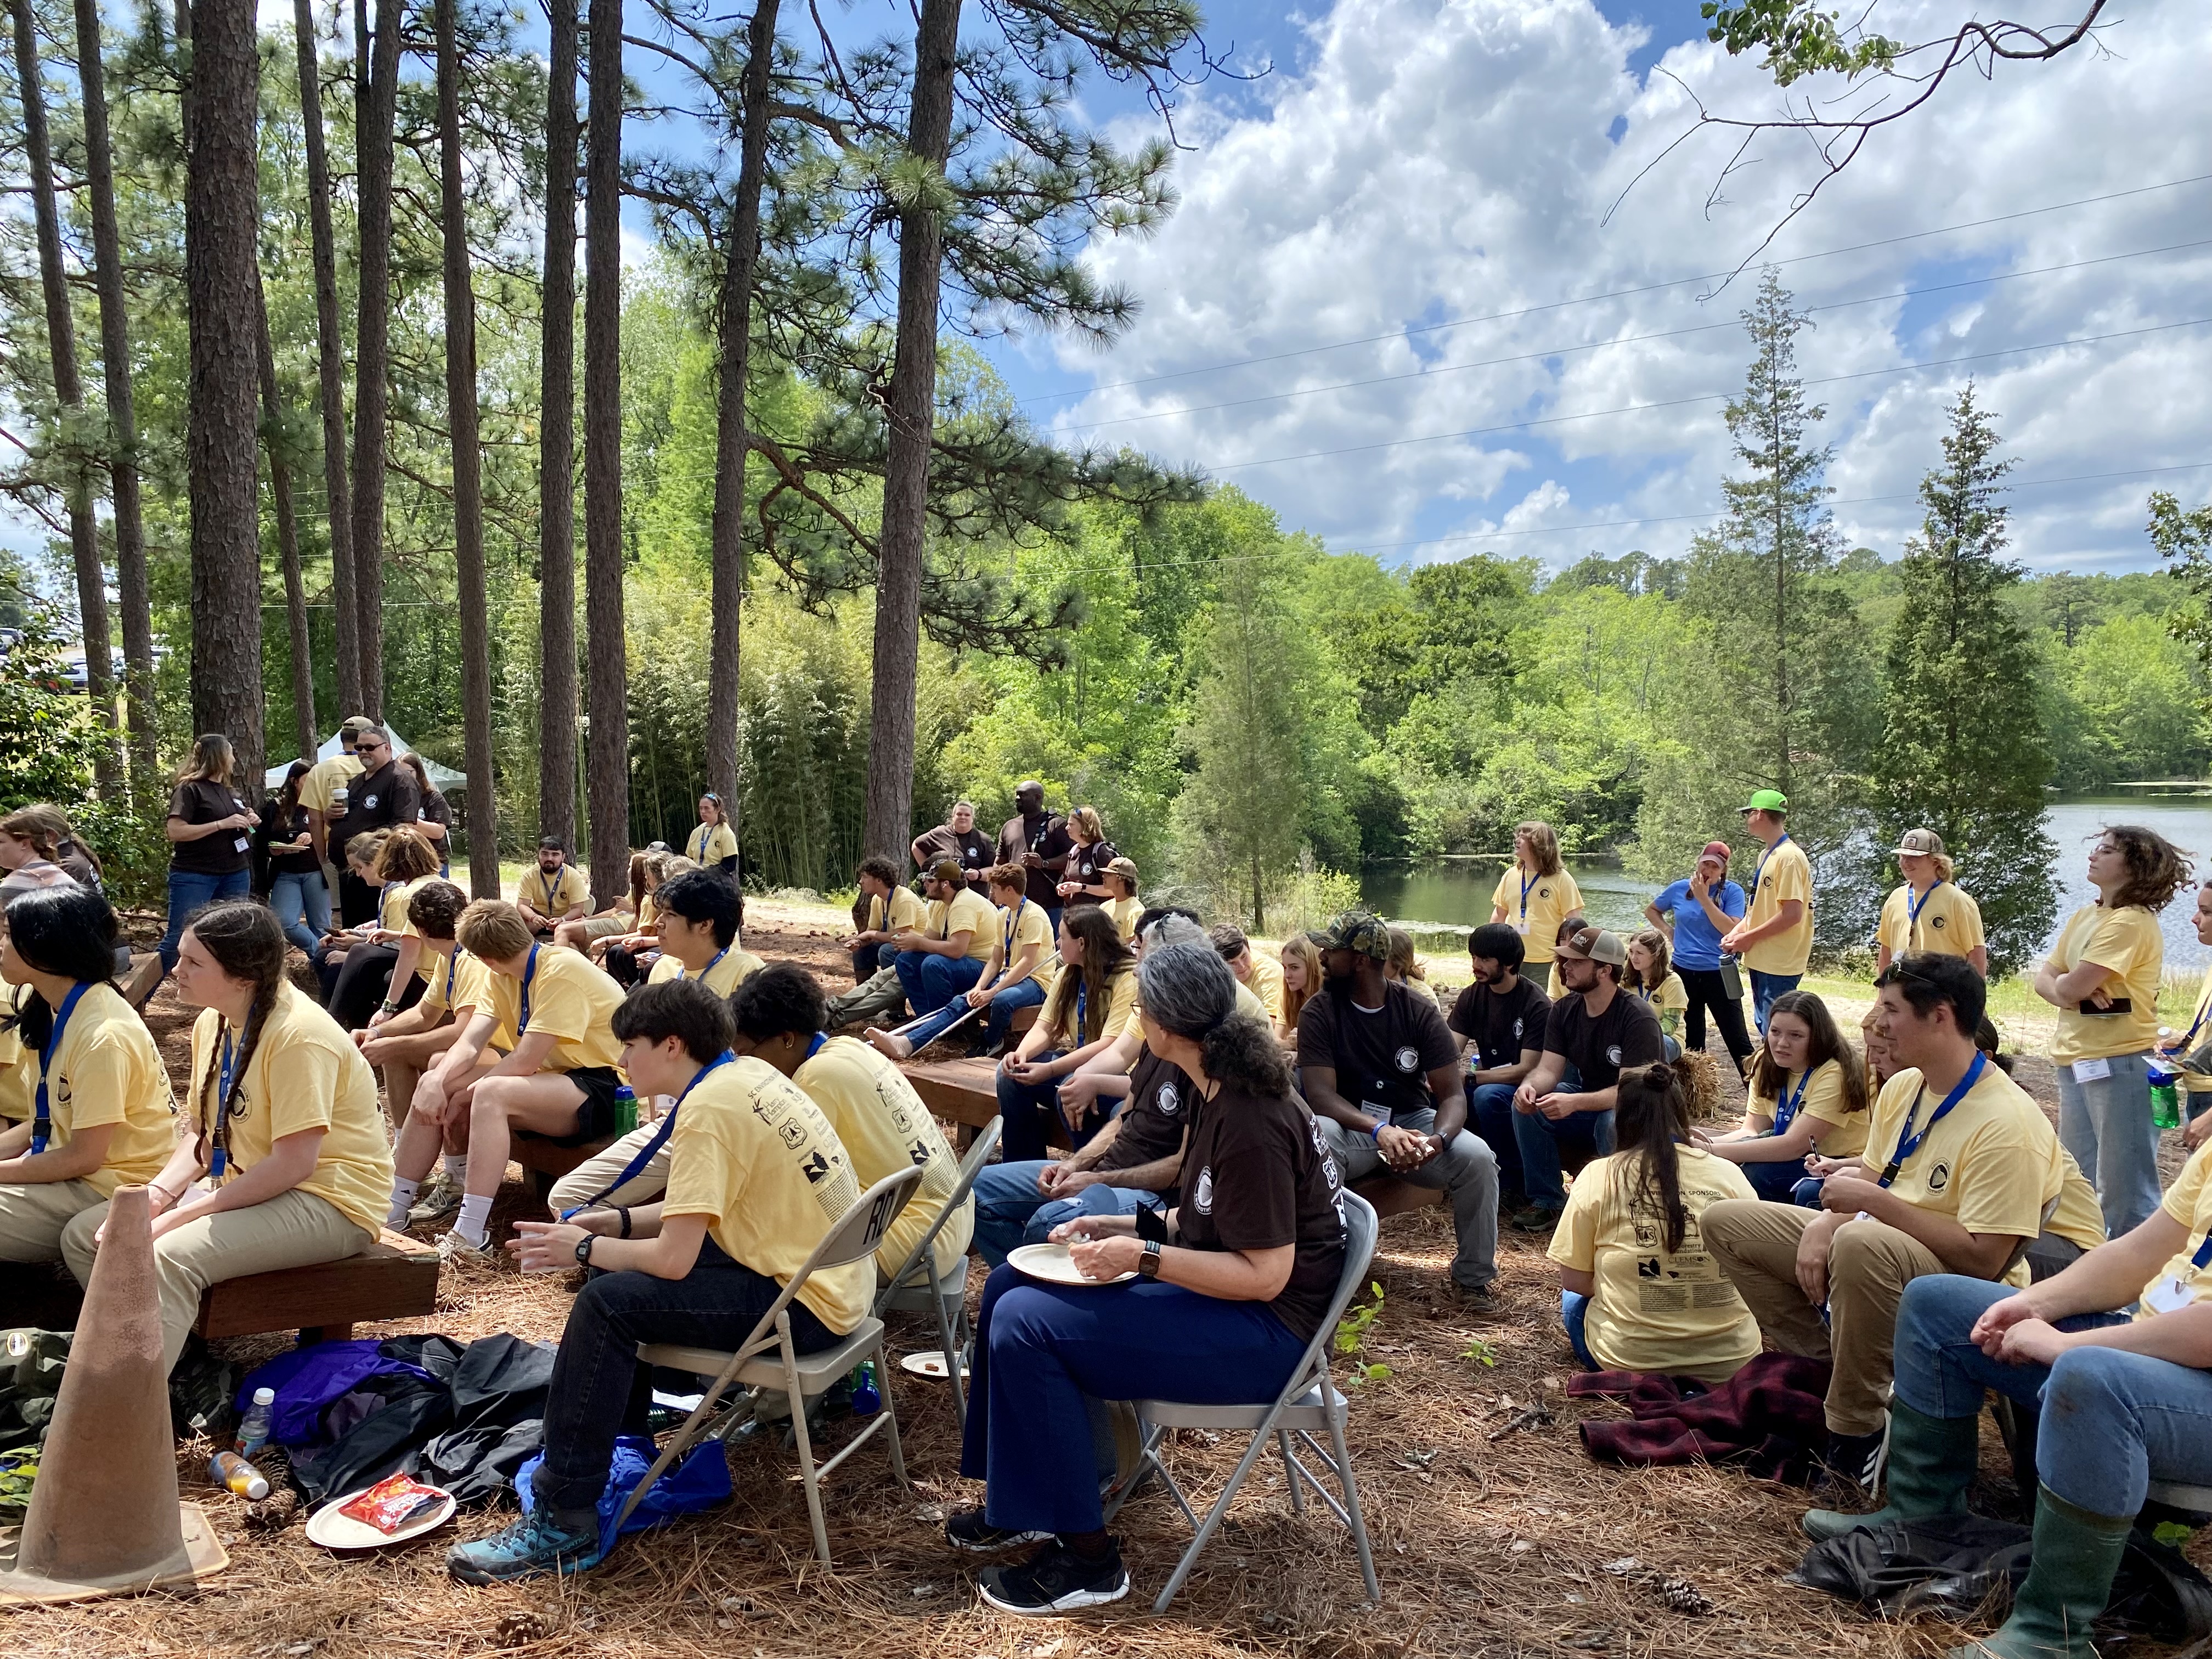 Students wearing matching yellow t-shirts sit in groups outdoors during the SC Envirothon competition